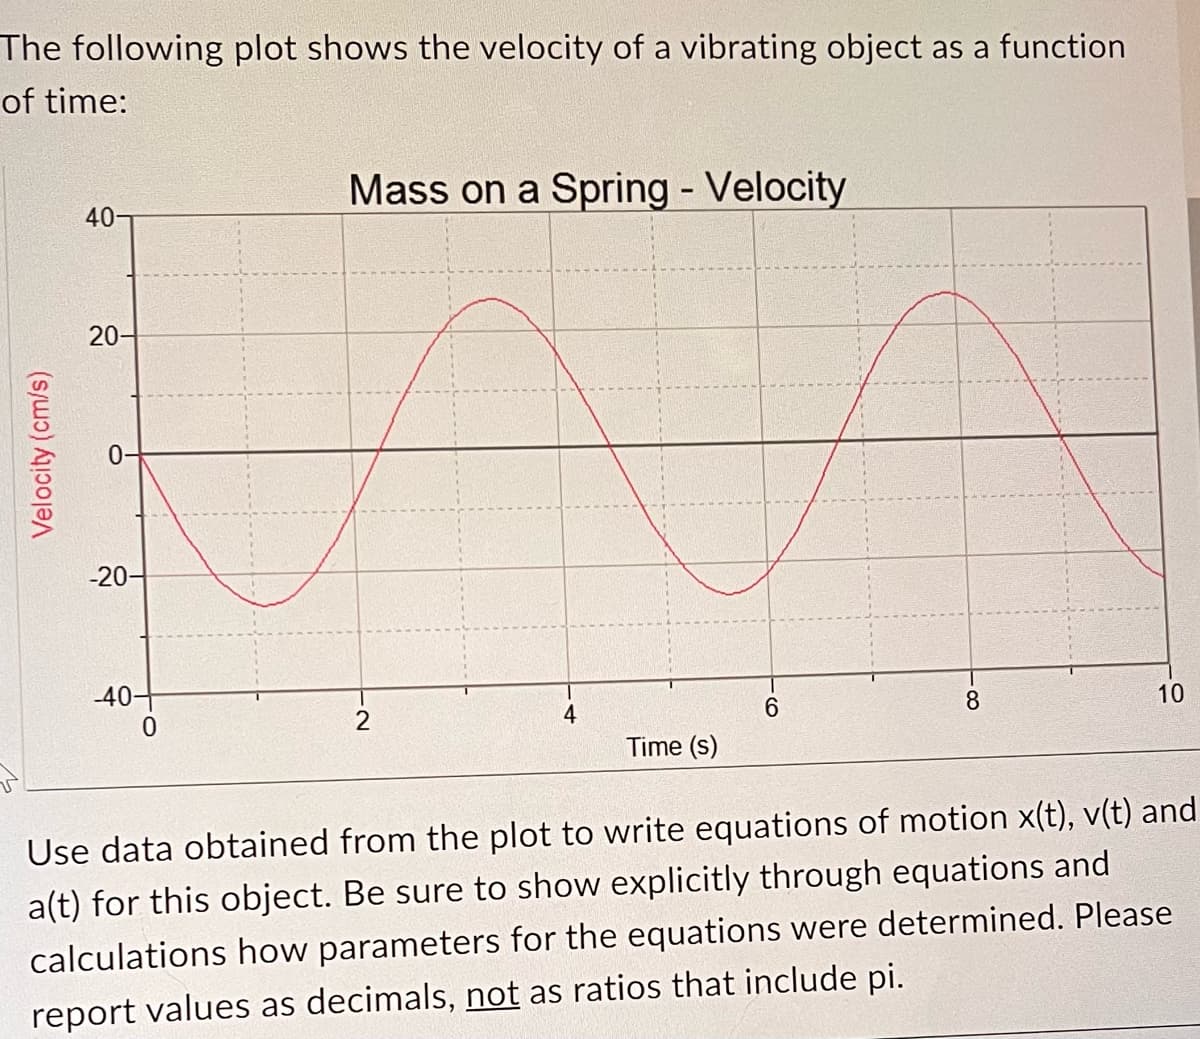 The following plot shows the velocity of a vibrating object as a function
of time:
Velocity (cm/s)
40-
20-
-20
40-
0
Mass on a Spring - Velocity
2
4
Time (s)
6
8
10
Use data obtained from the plot to write equations of motion x(t), v(t) and
a(t) for this object. Be sure to show explicitly through equations and
calculations how parameters for the equations were determined. Please
report values as decimals, not as ratios that include pi.